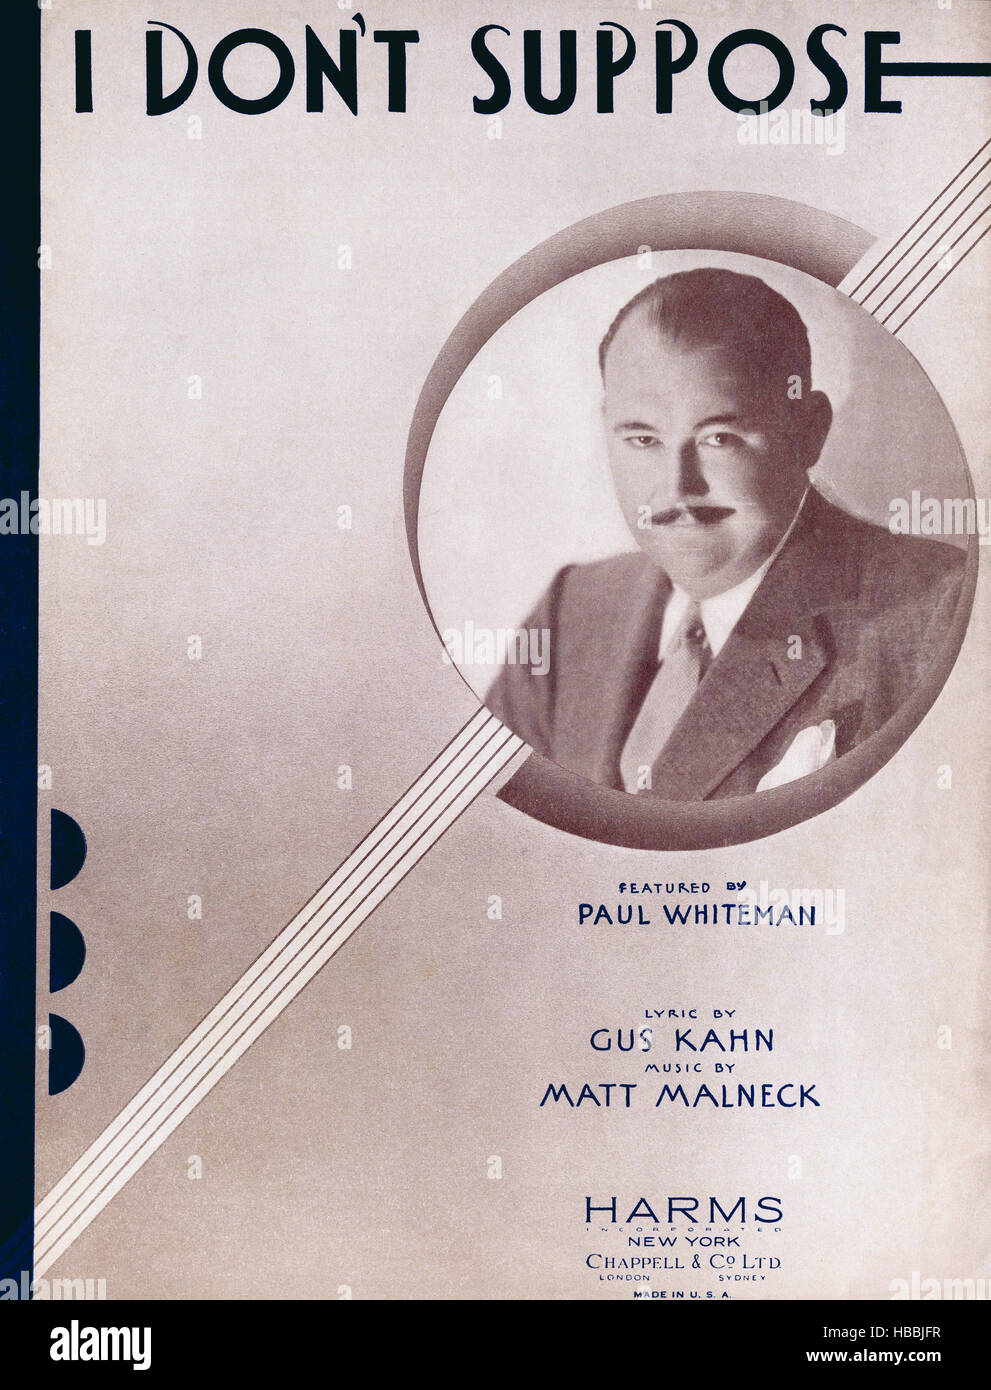 I Don't Suppose, sheet music by Gus Hahn and Matt Malneck, as performed by Paul Whiteman (pictured), circa 1920s. Stock Photo